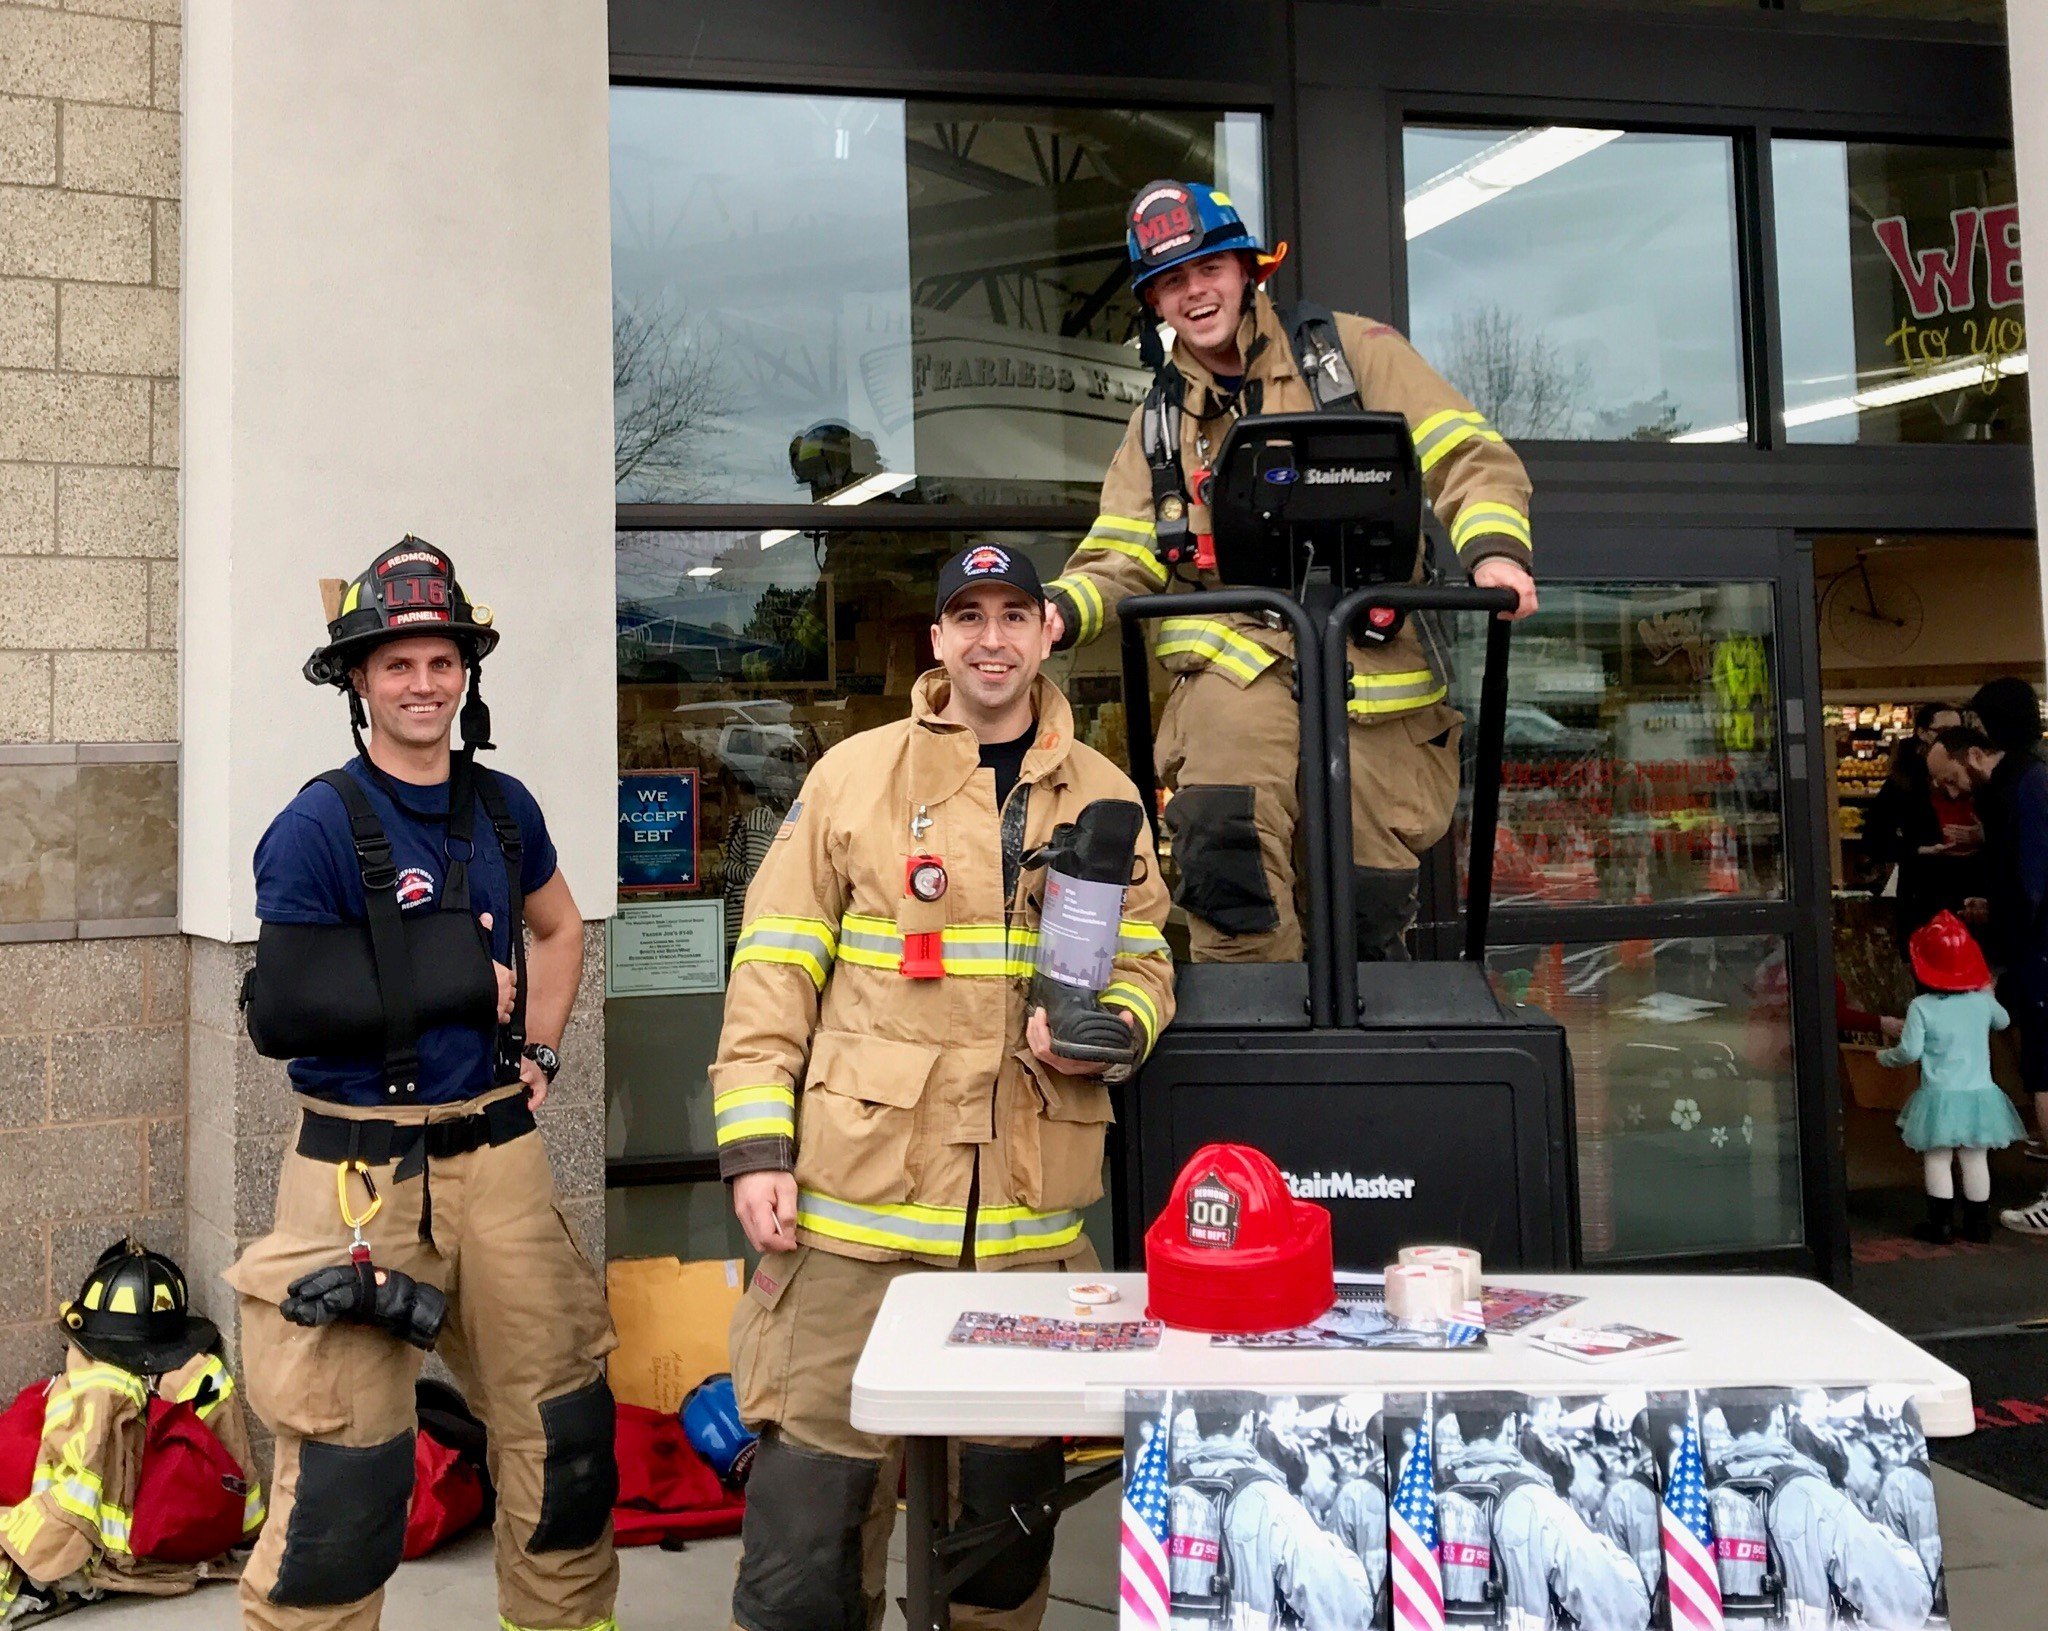 Redmond firefighter/paramedic Josh Peeples stair climbs, firefighter/paramedic Andrea DeCaro holds the boot and firefighter/EMT Tyler Parnell stands at left at Trader Joe’s. Courtesy photo